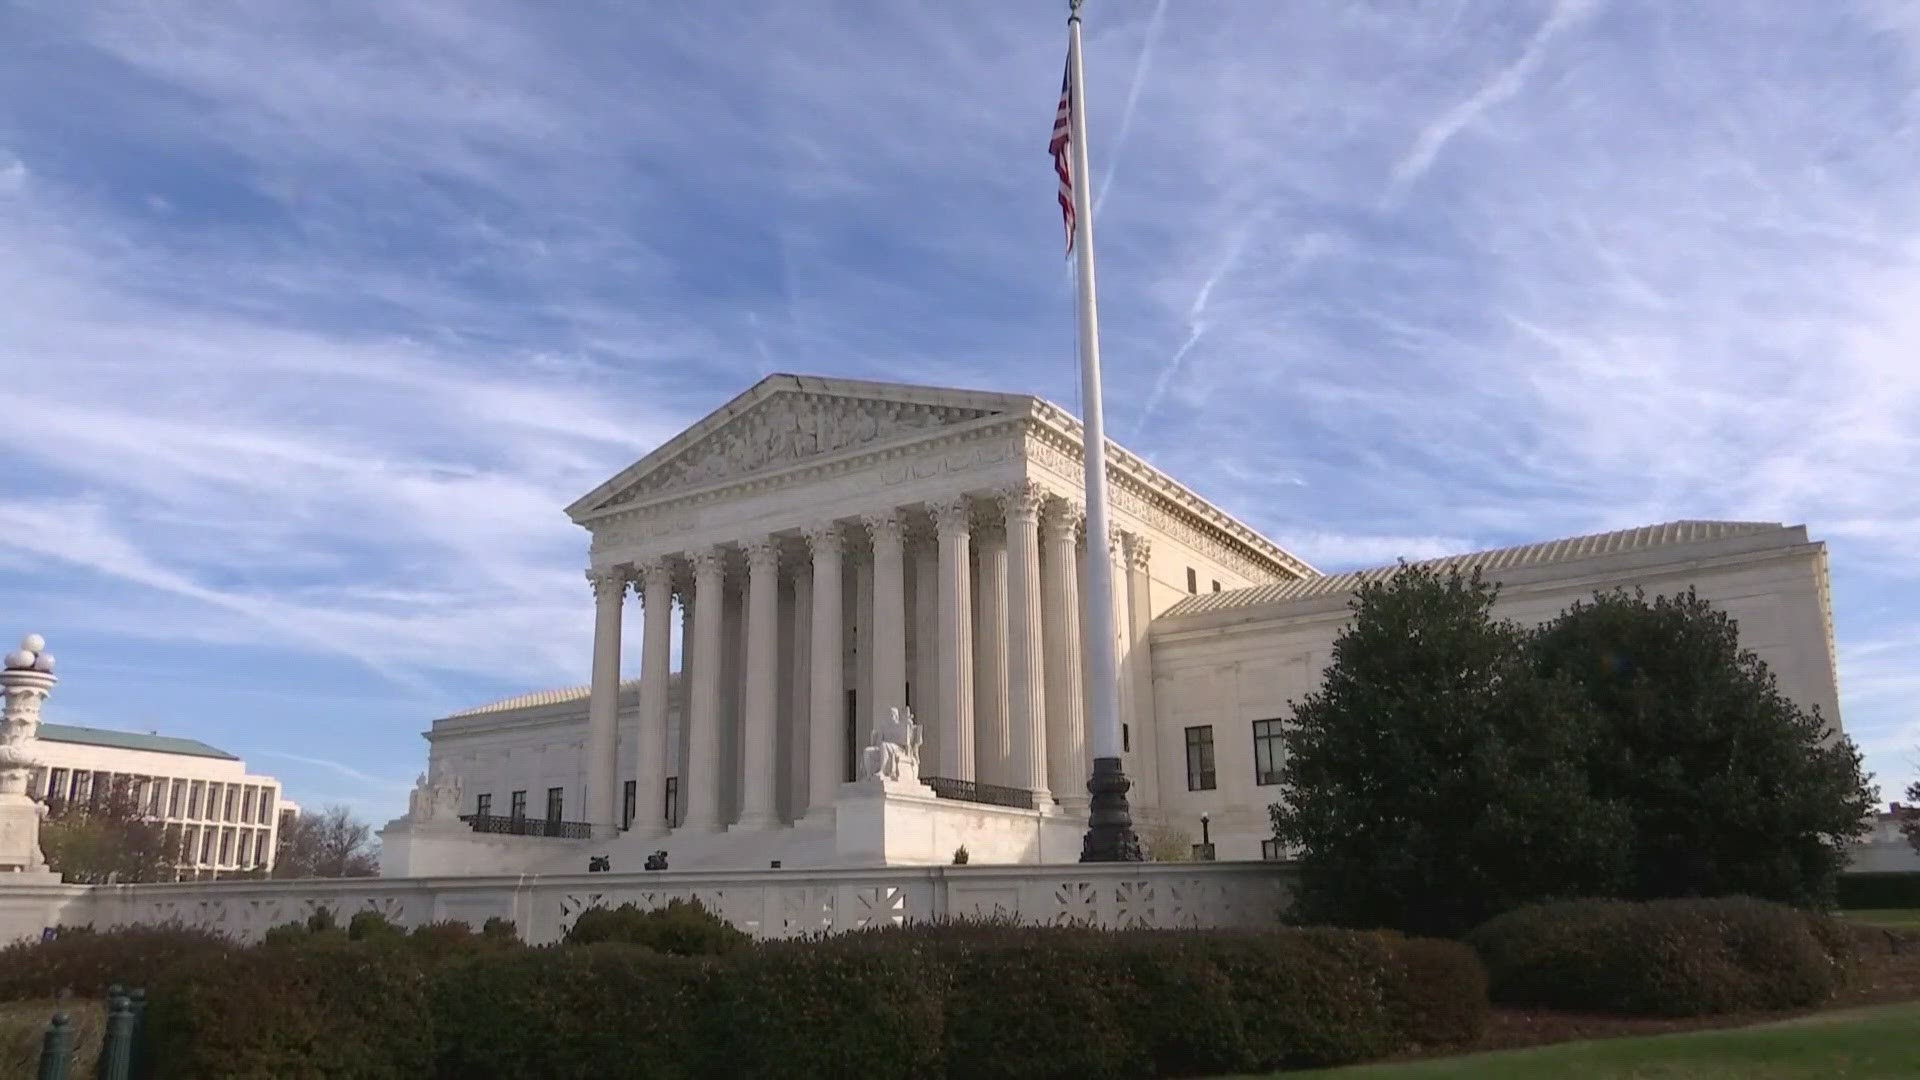 The Supreme Court has issued its ruling on President Joe Biden's student loan forgiveness plan.